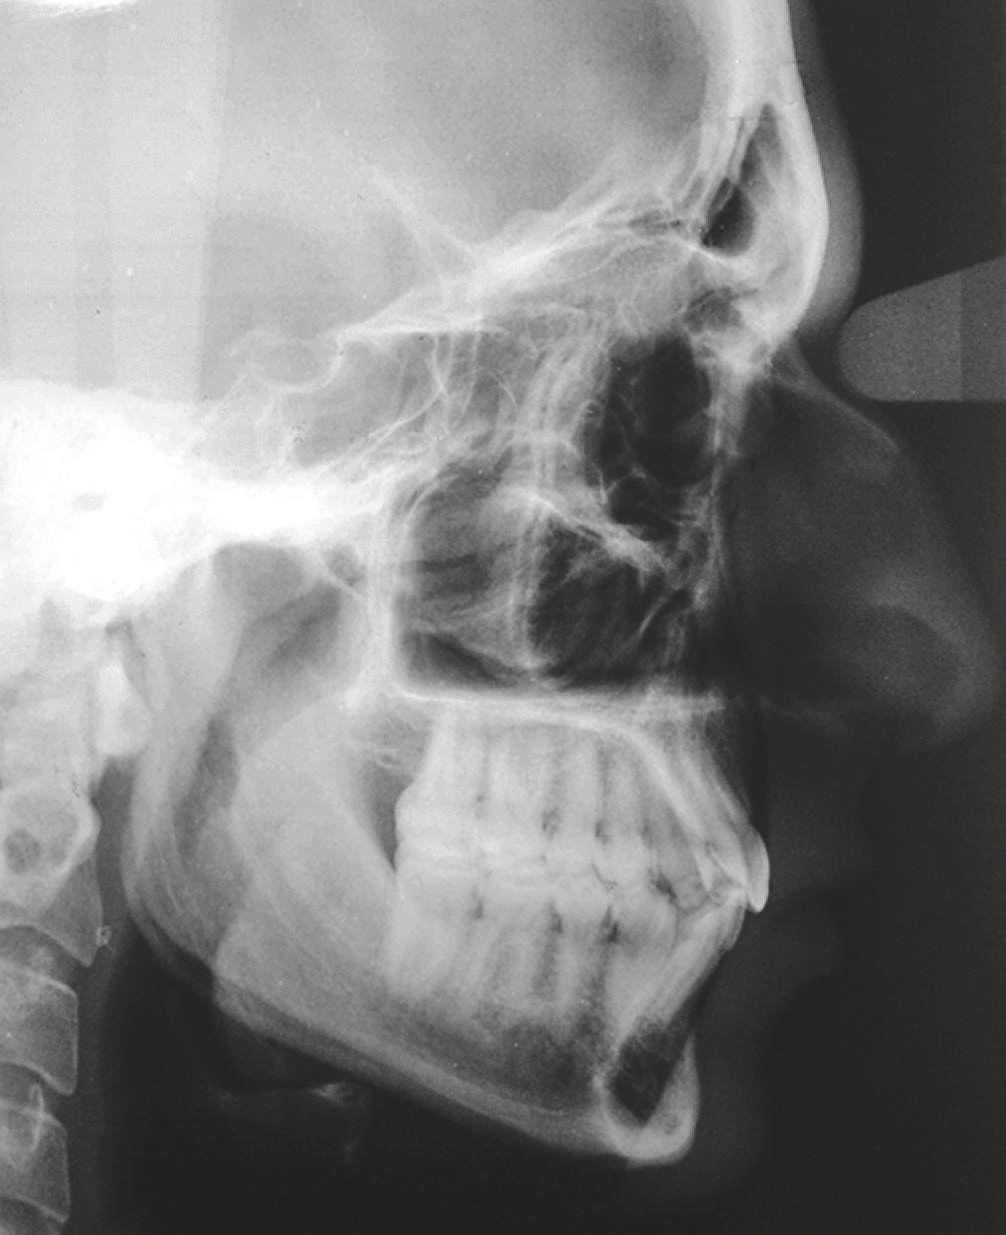 O case report Class II malocclusion associated with mandibular deficiency and maxillary and mandibular crowding: follow-up evaluation eight years after treatment completion Figure 23 - Follow-up